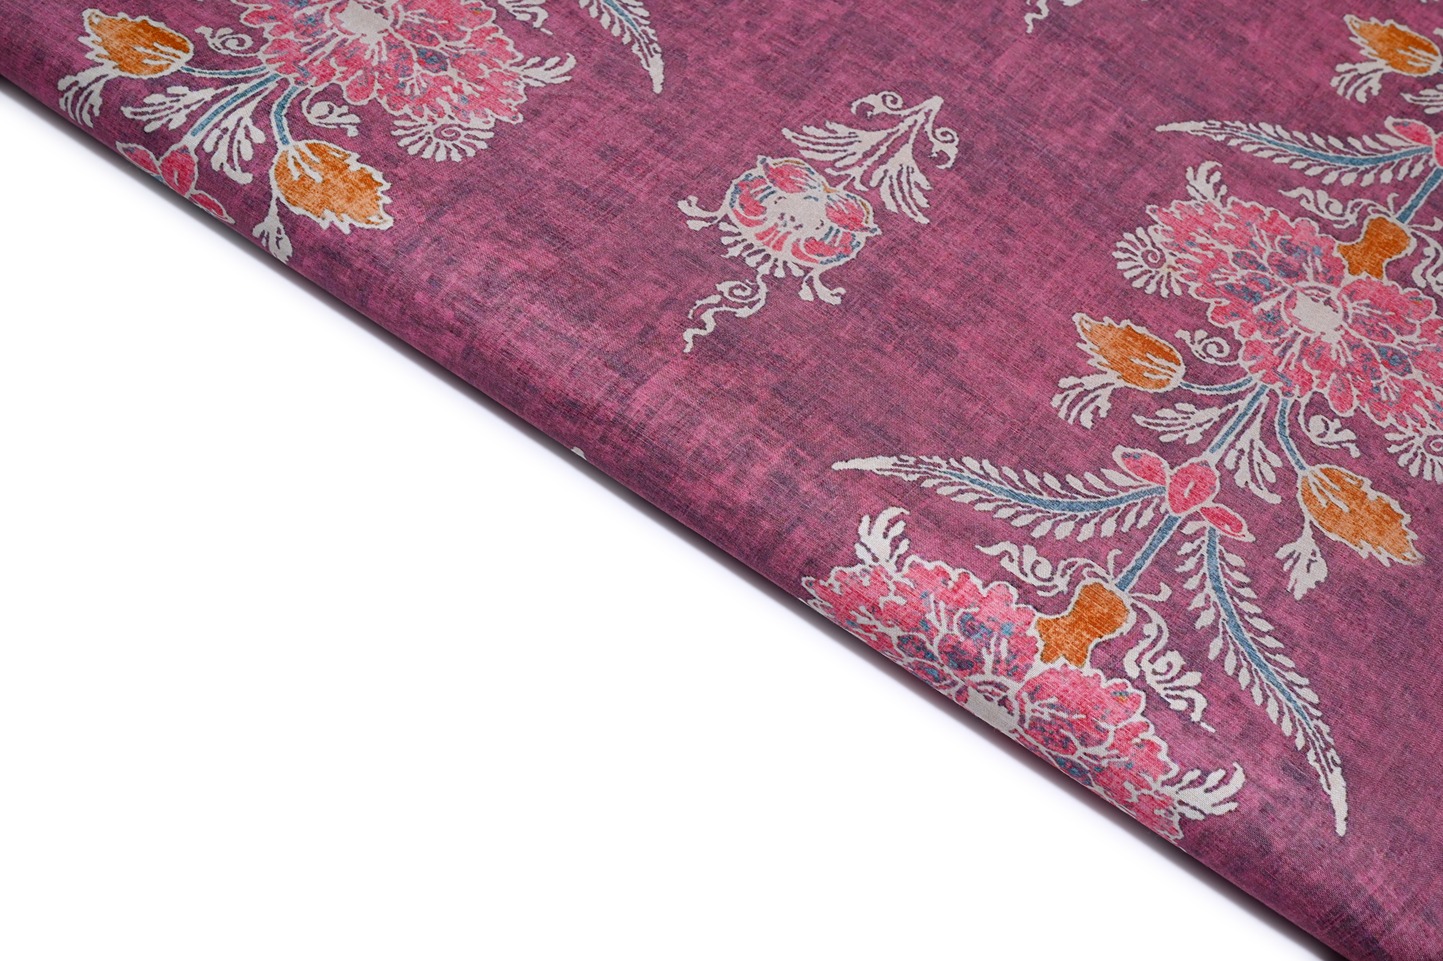 MAGICAL DUSTY PINK COLOR DIGITAL BRUSH PATTERN WITH PAISLEY PATTERN MUSLIN SILK PRINT FABRIC 10606